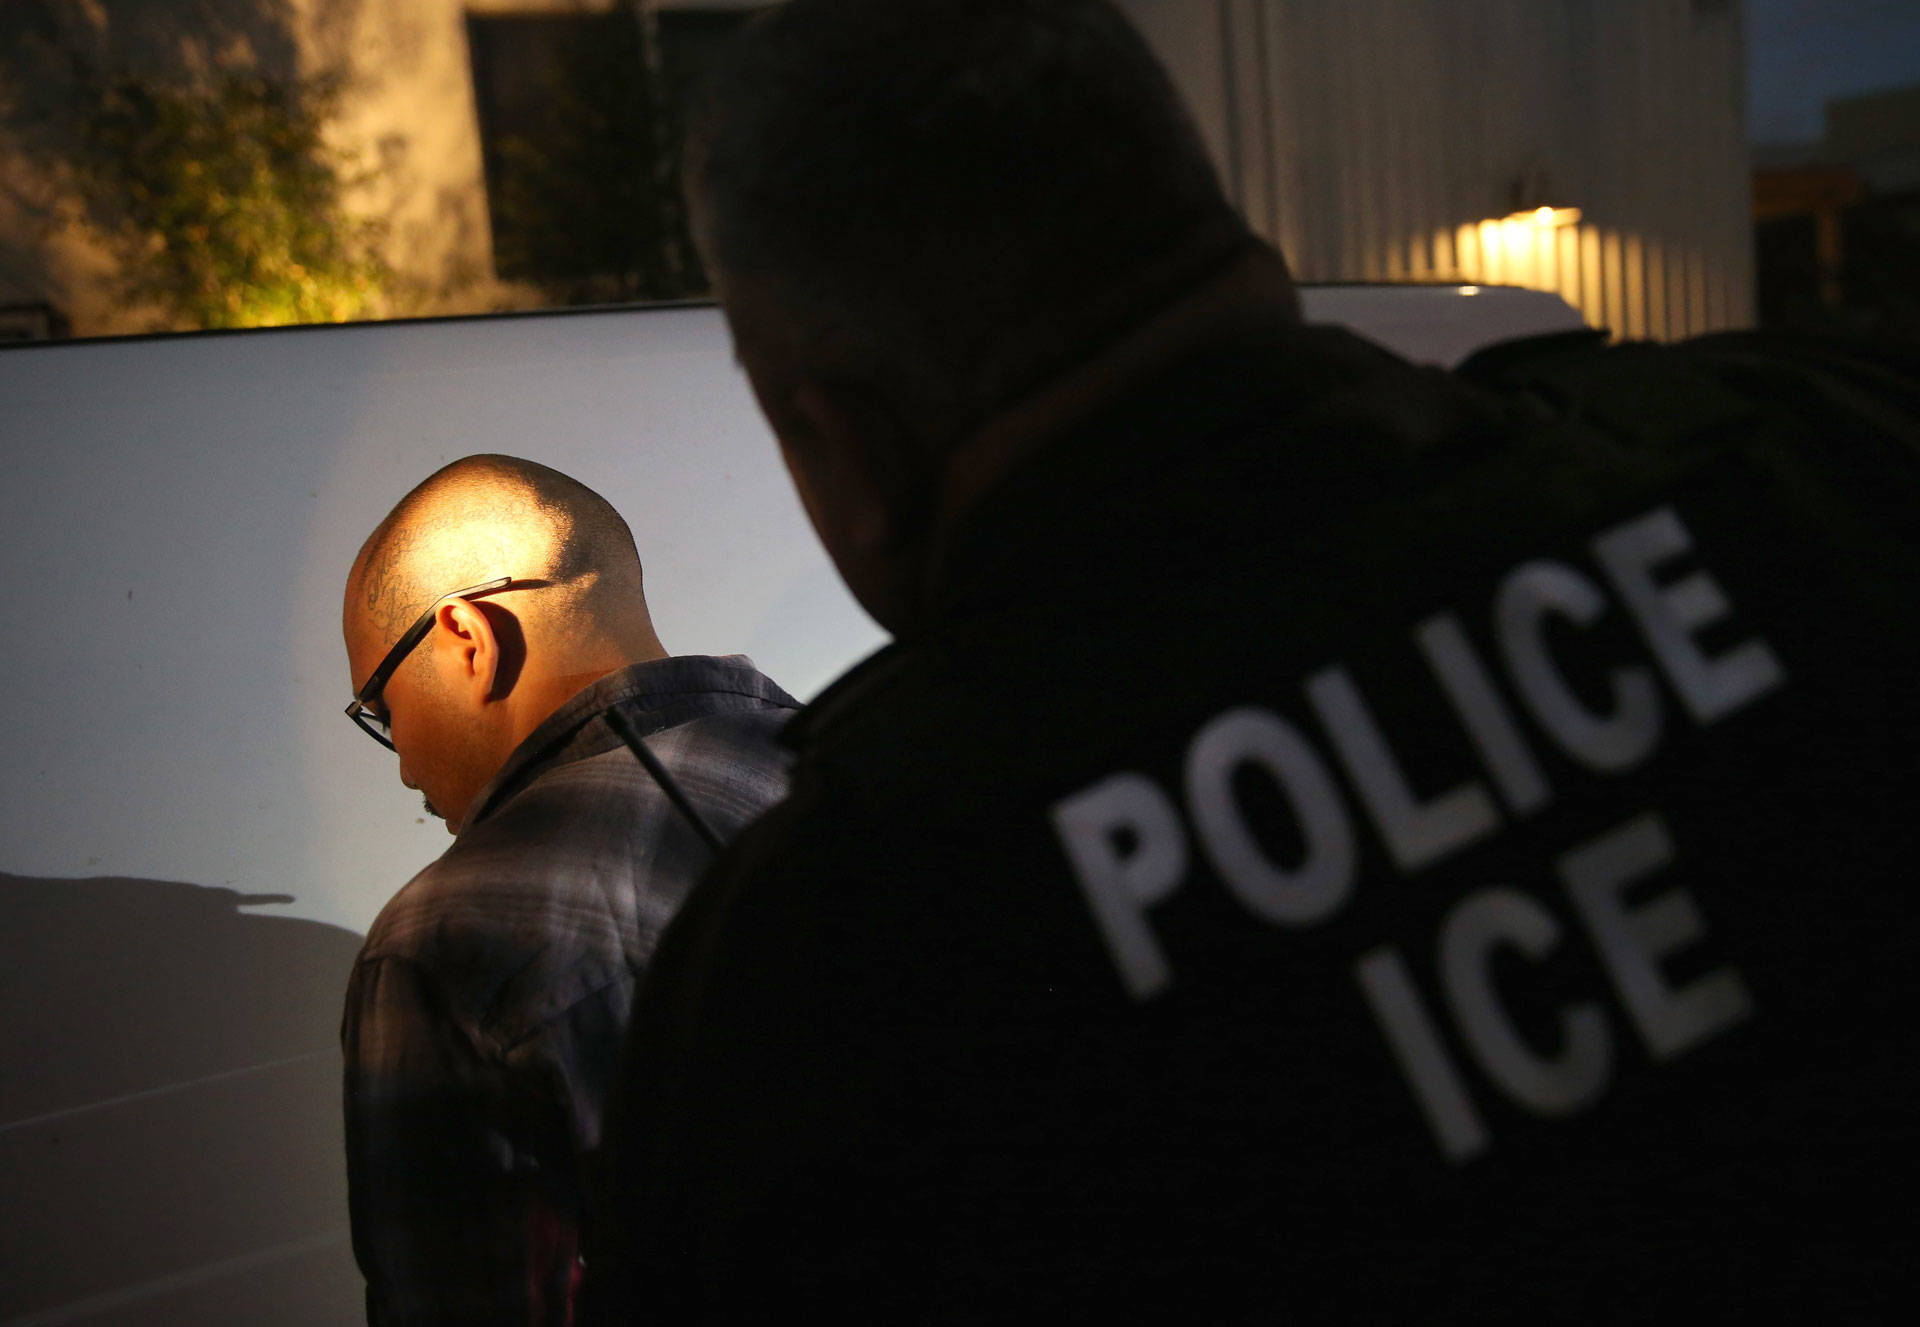 A man is detained by Immigration and Customs Enforcement (ICE) agents in October 2015 in Los Angeles John Moore/Getty Images